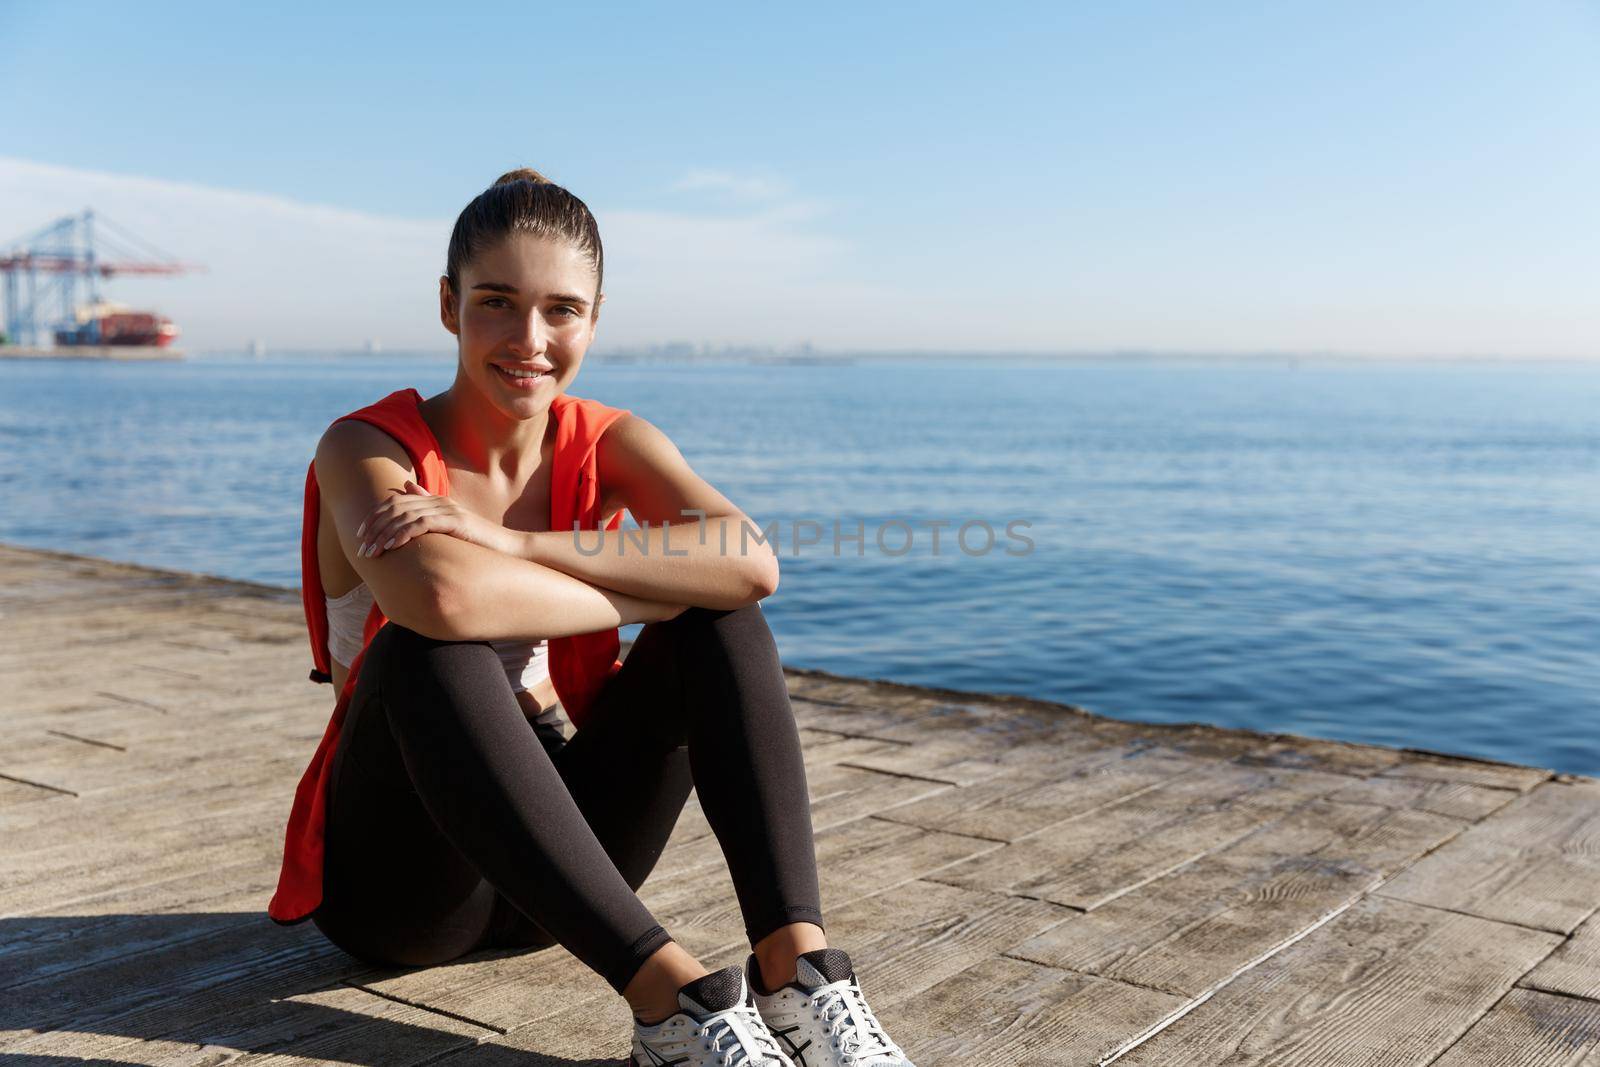 Outdoor shot of beautiful young sportswoman sitting on wooden pier and smiling. Fitness woman resting after workout near the sea, enjoying view.